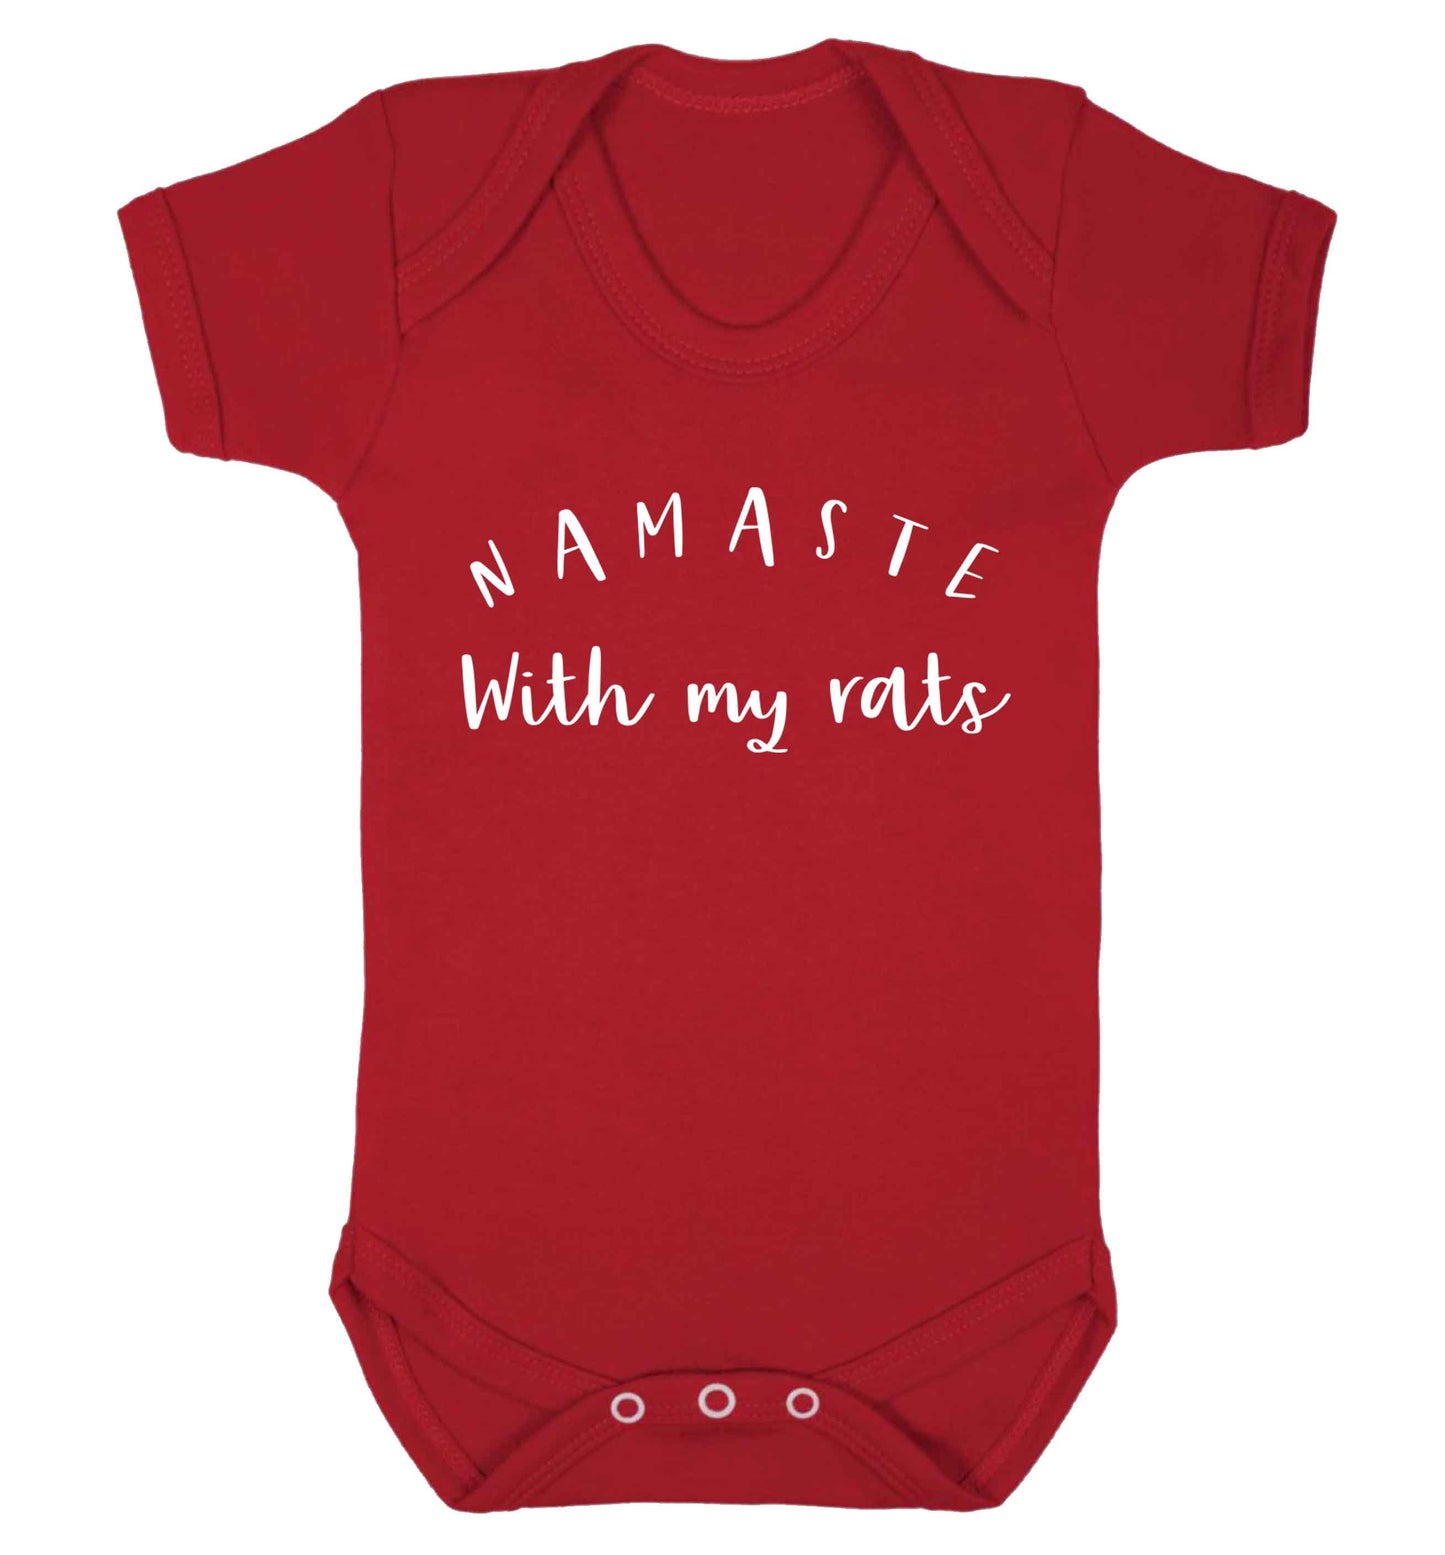 Namaste with my rats Baby Vest red 18-24 months